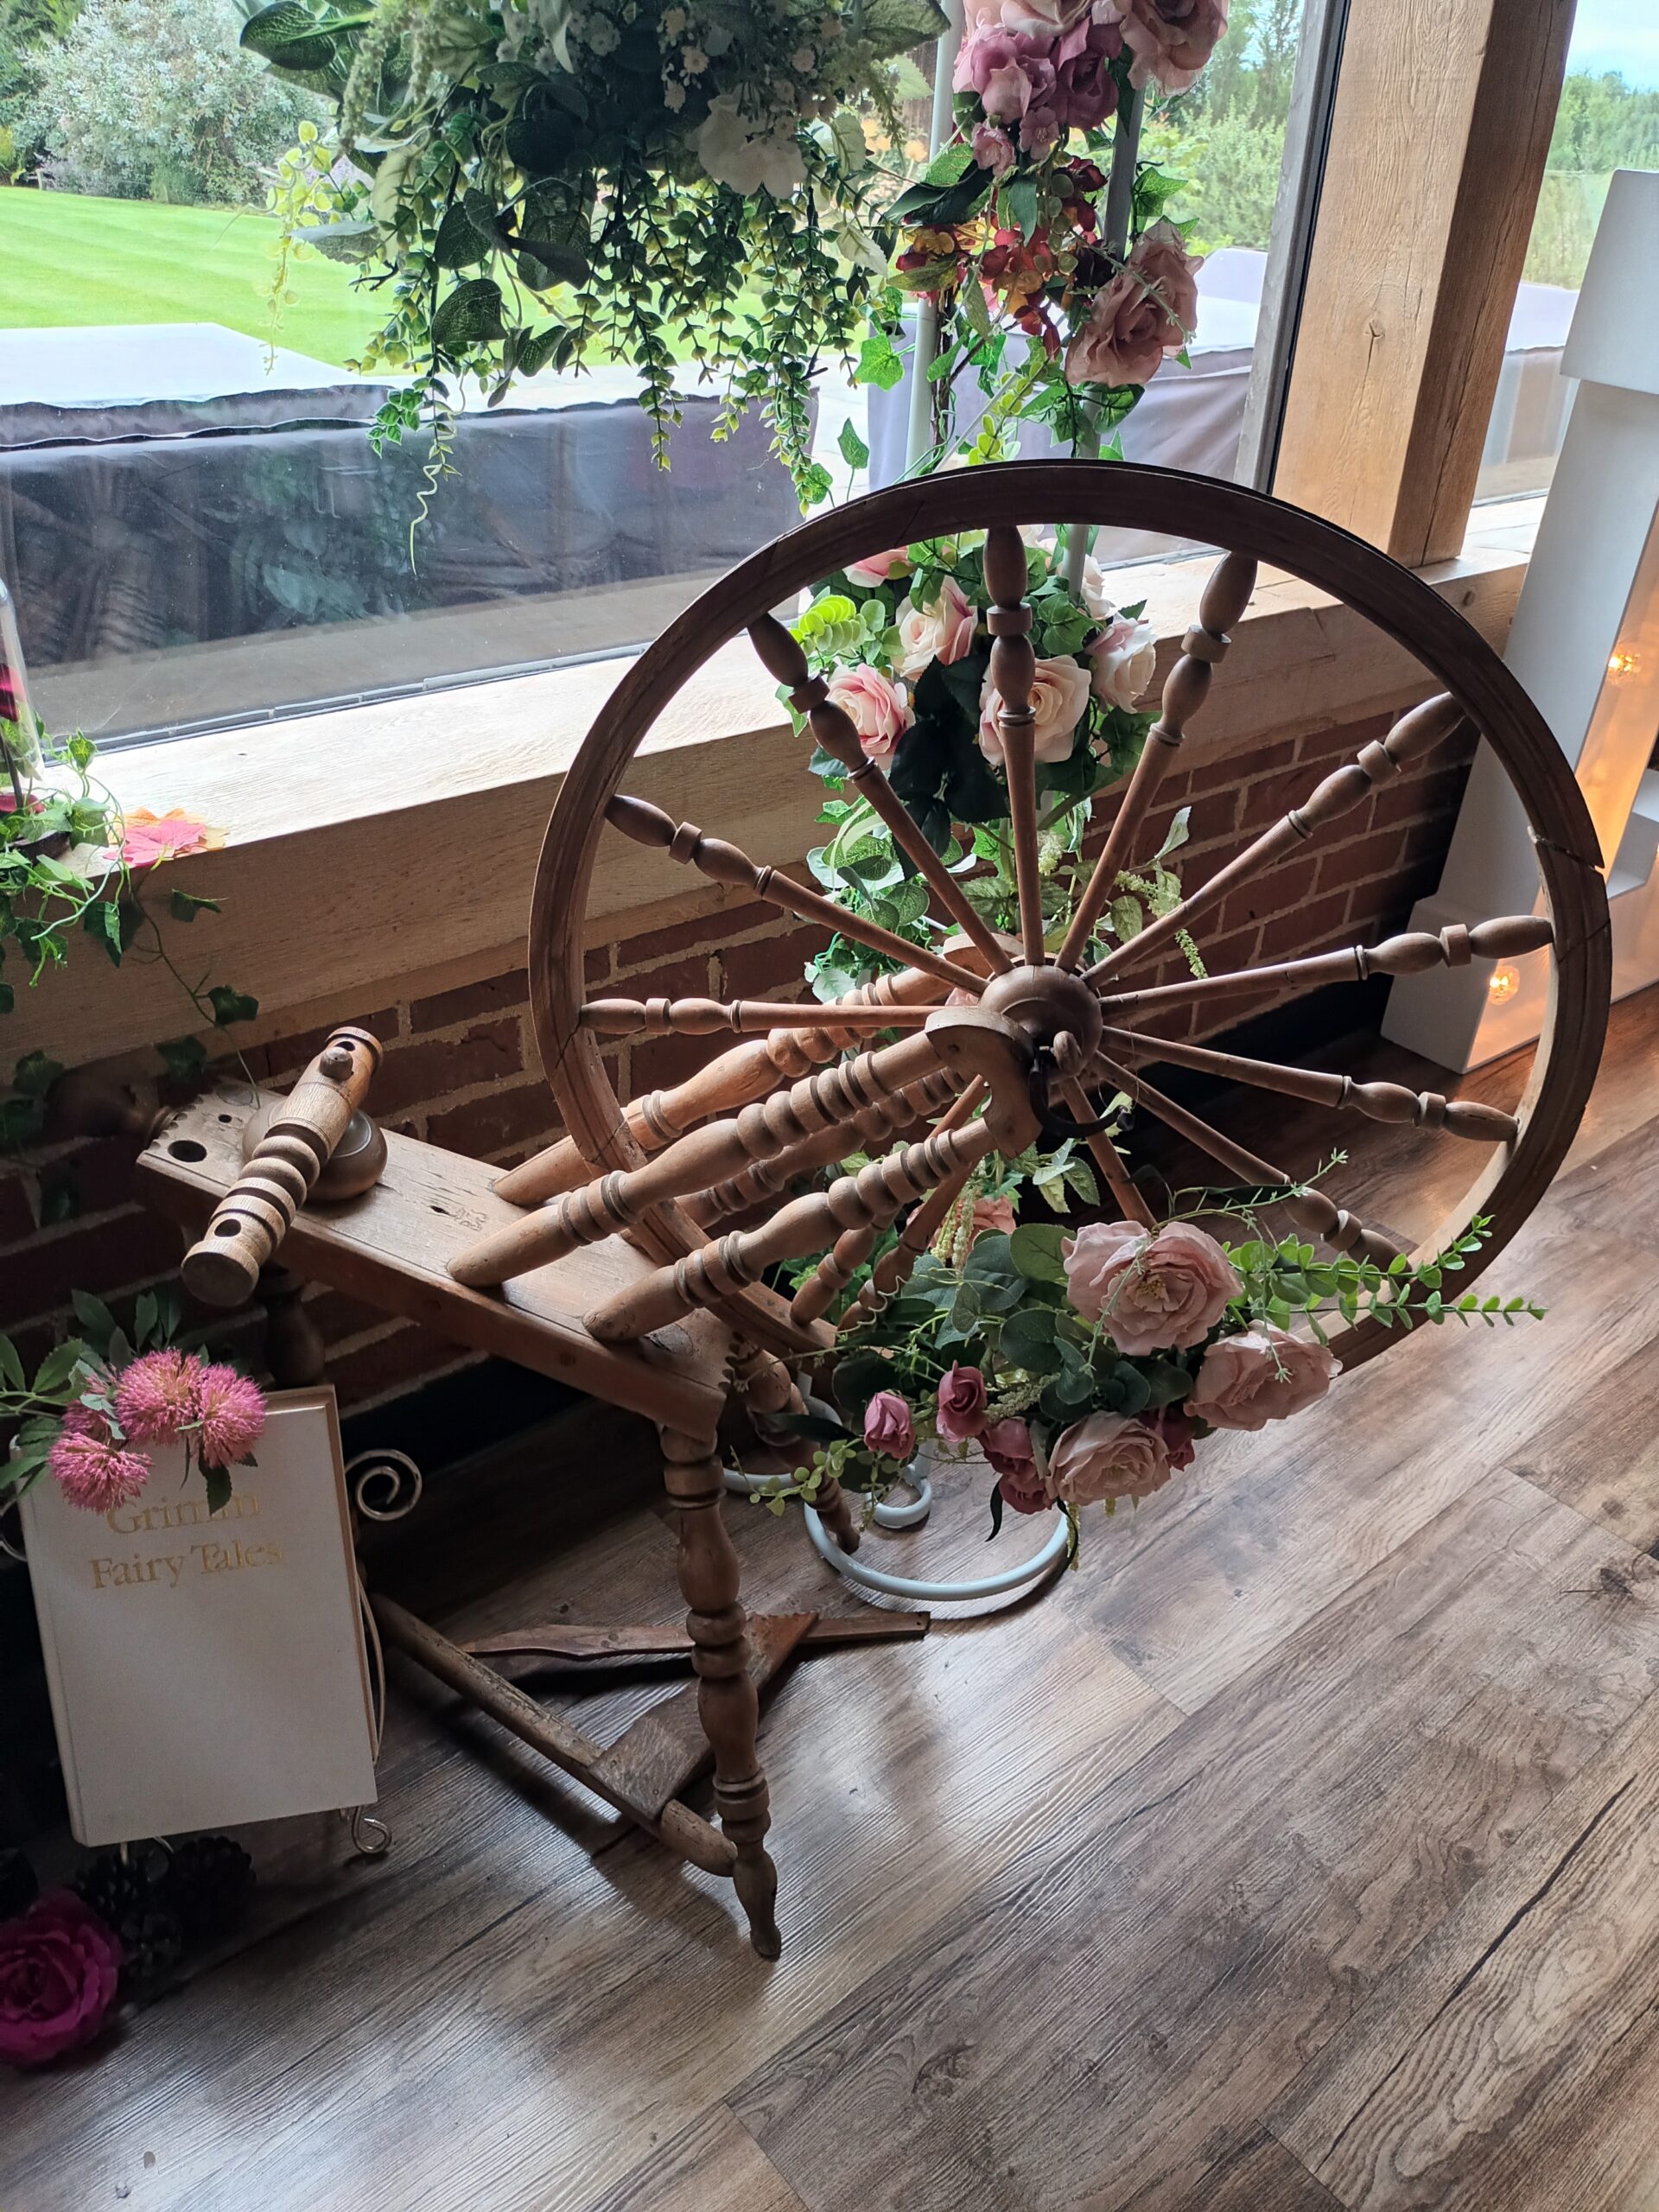 Fairytale wedding vintage spinning wheel decorated with pink flowers